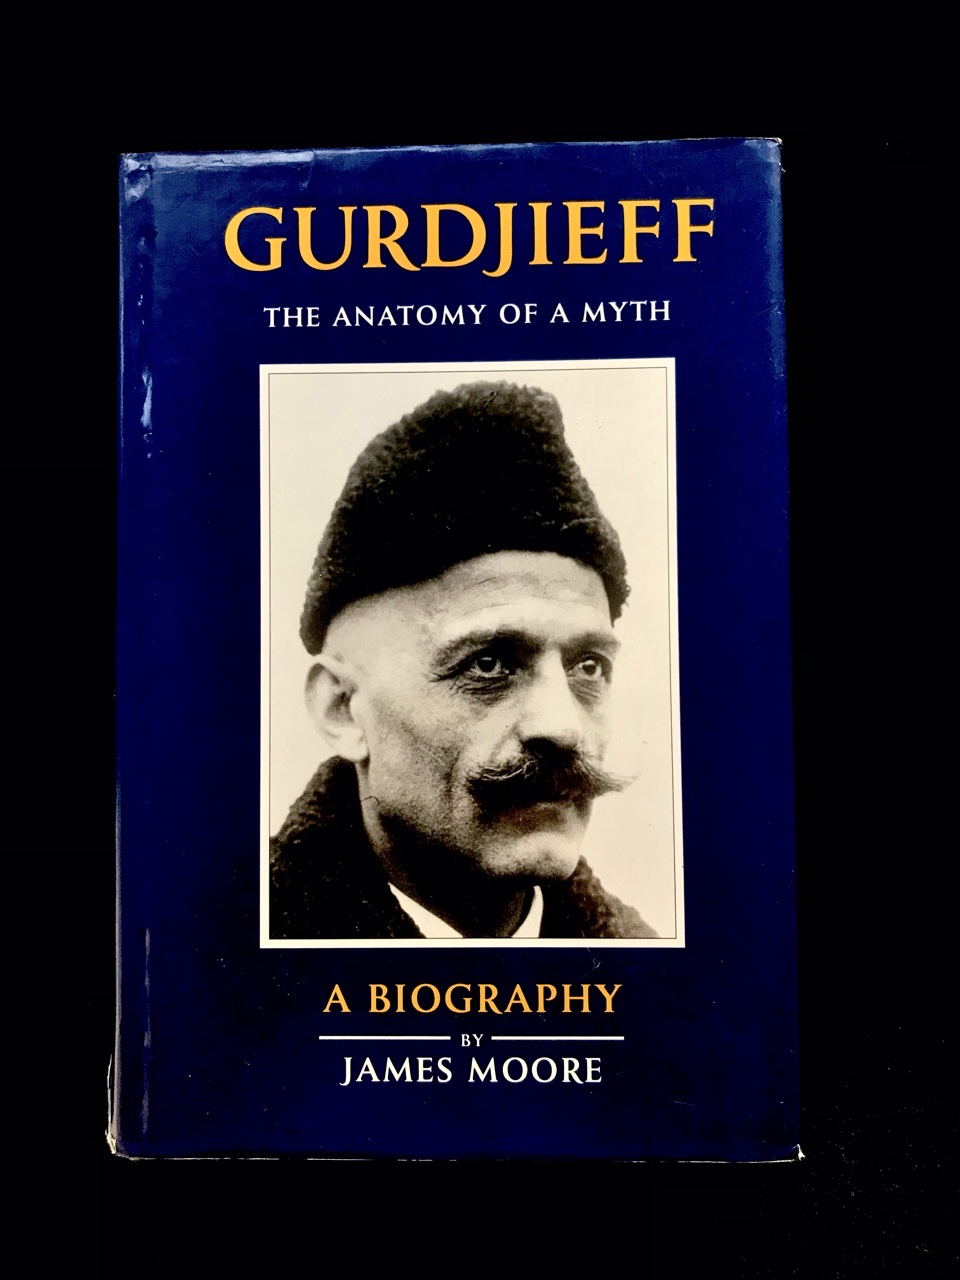 Gurdjieff: The Anatomy Of A Myth by James Moore